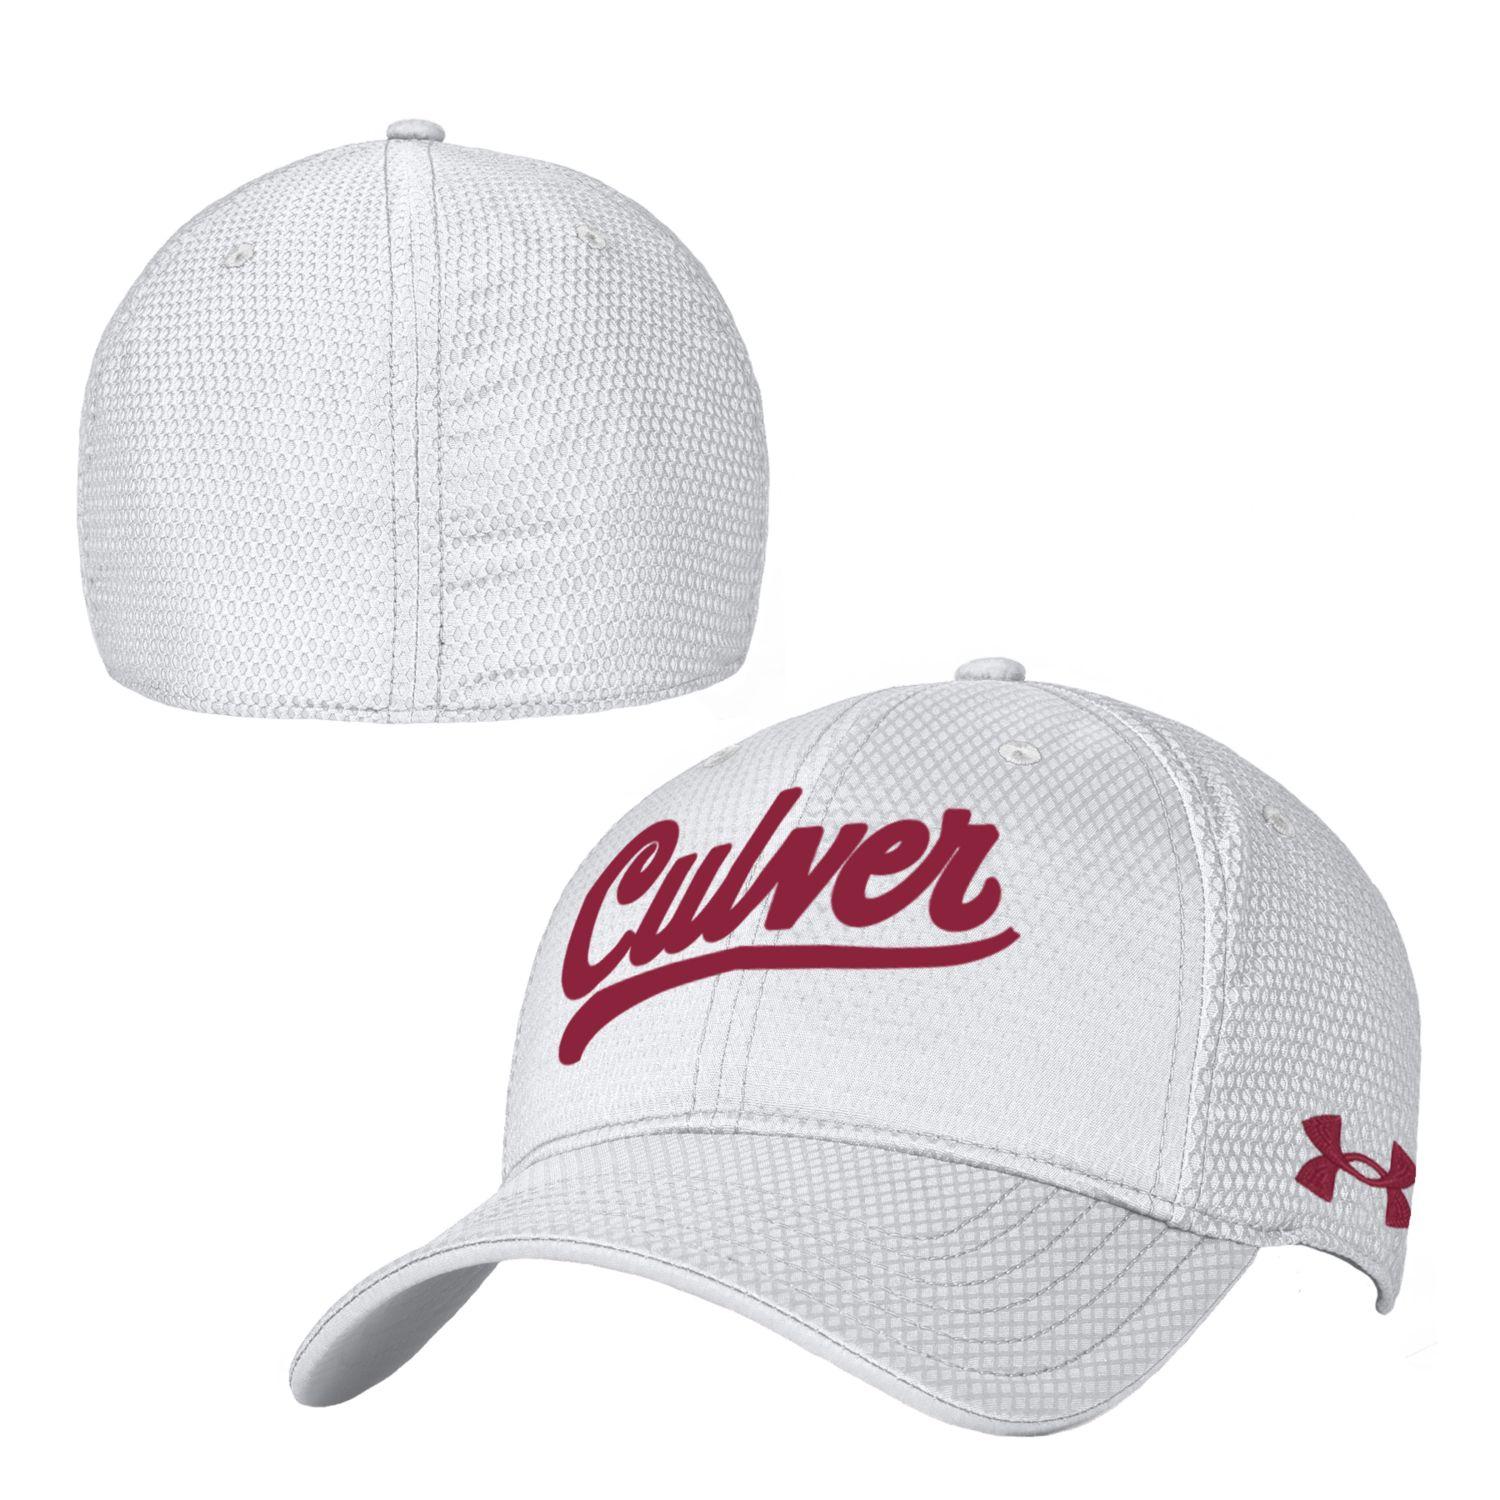 Under Armour Culver Zone Stretch Fit Hat - White